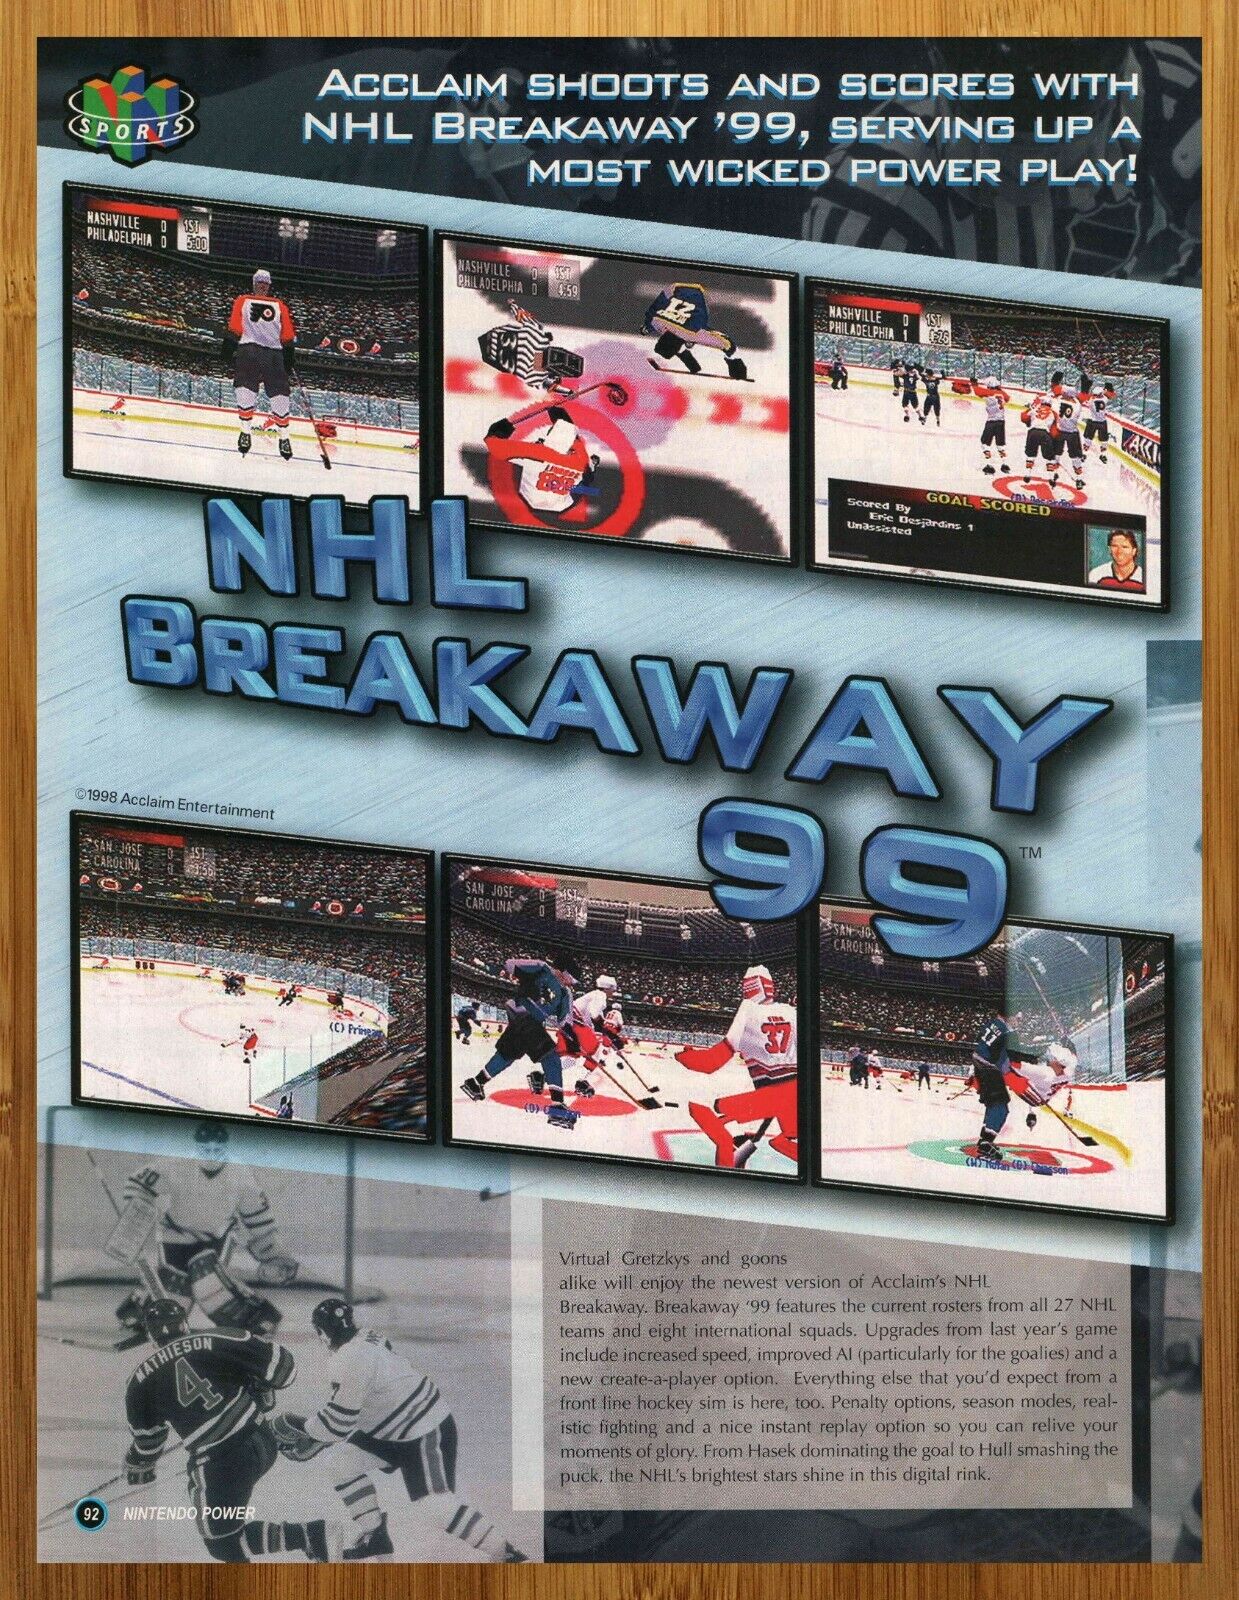 1998 NHL Breakaway \'99 N64 Print Ad/Poster Page Authentic Hockey Game Retro Art